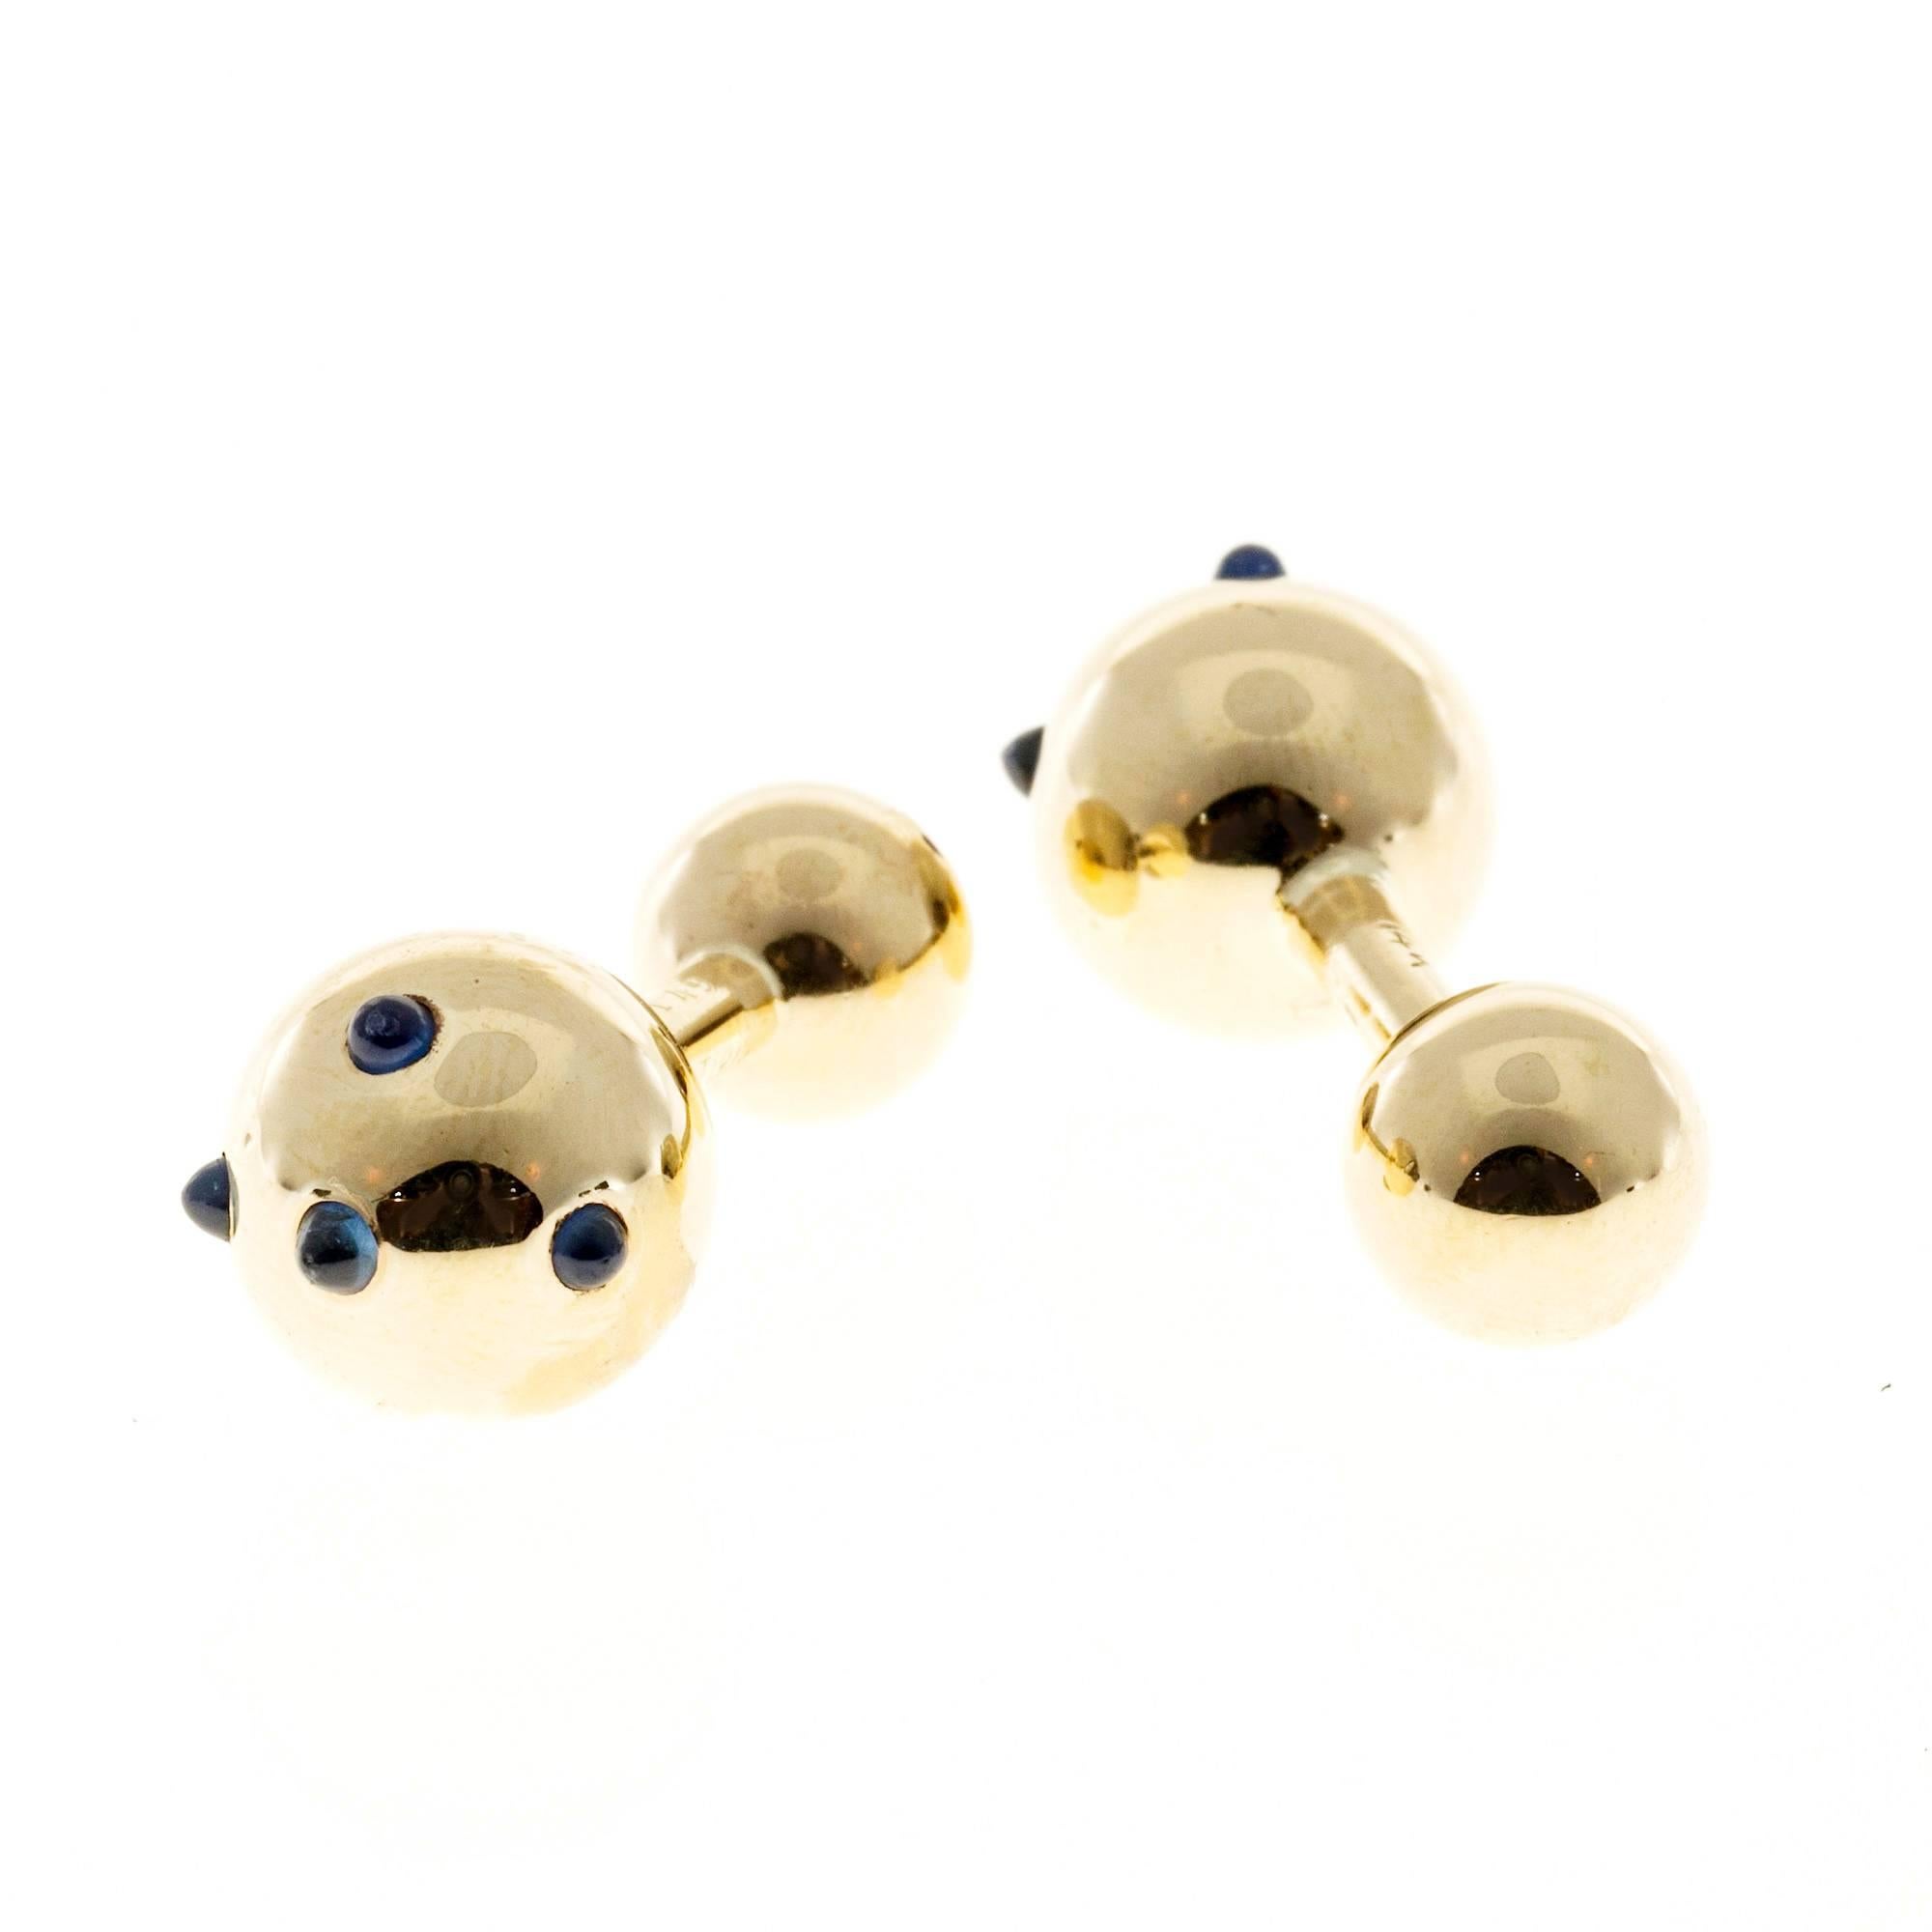 Cartier 1960-1969 Cartier barbell cufflinks in 14k yellow gold with cabochon Sapphires.

10 round cabochon blue Sapphires, VS, 2mm
14k yellow gold
Tested and stamped: 14k
Hallmark: 11149 Cartier
10.6 grams
Bar Bells: Large – 12.5mm – Small: